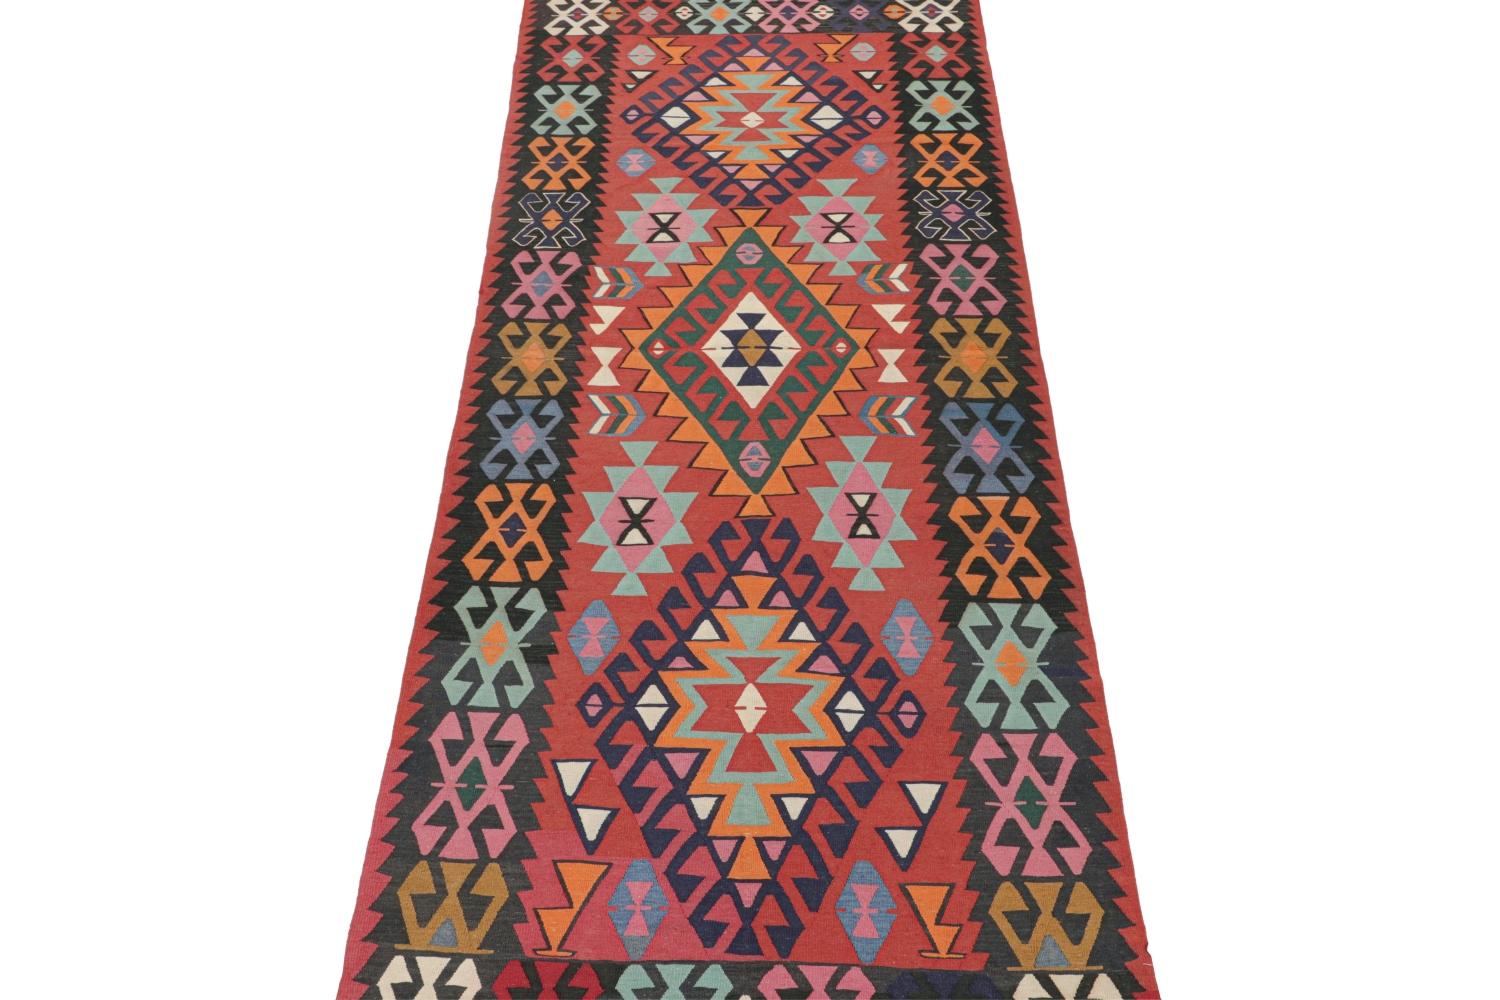 Vintage Azerbaijan Persian Kilim in Red with Geometric Patterns In Good Condition For Sale In Long Island City, NY